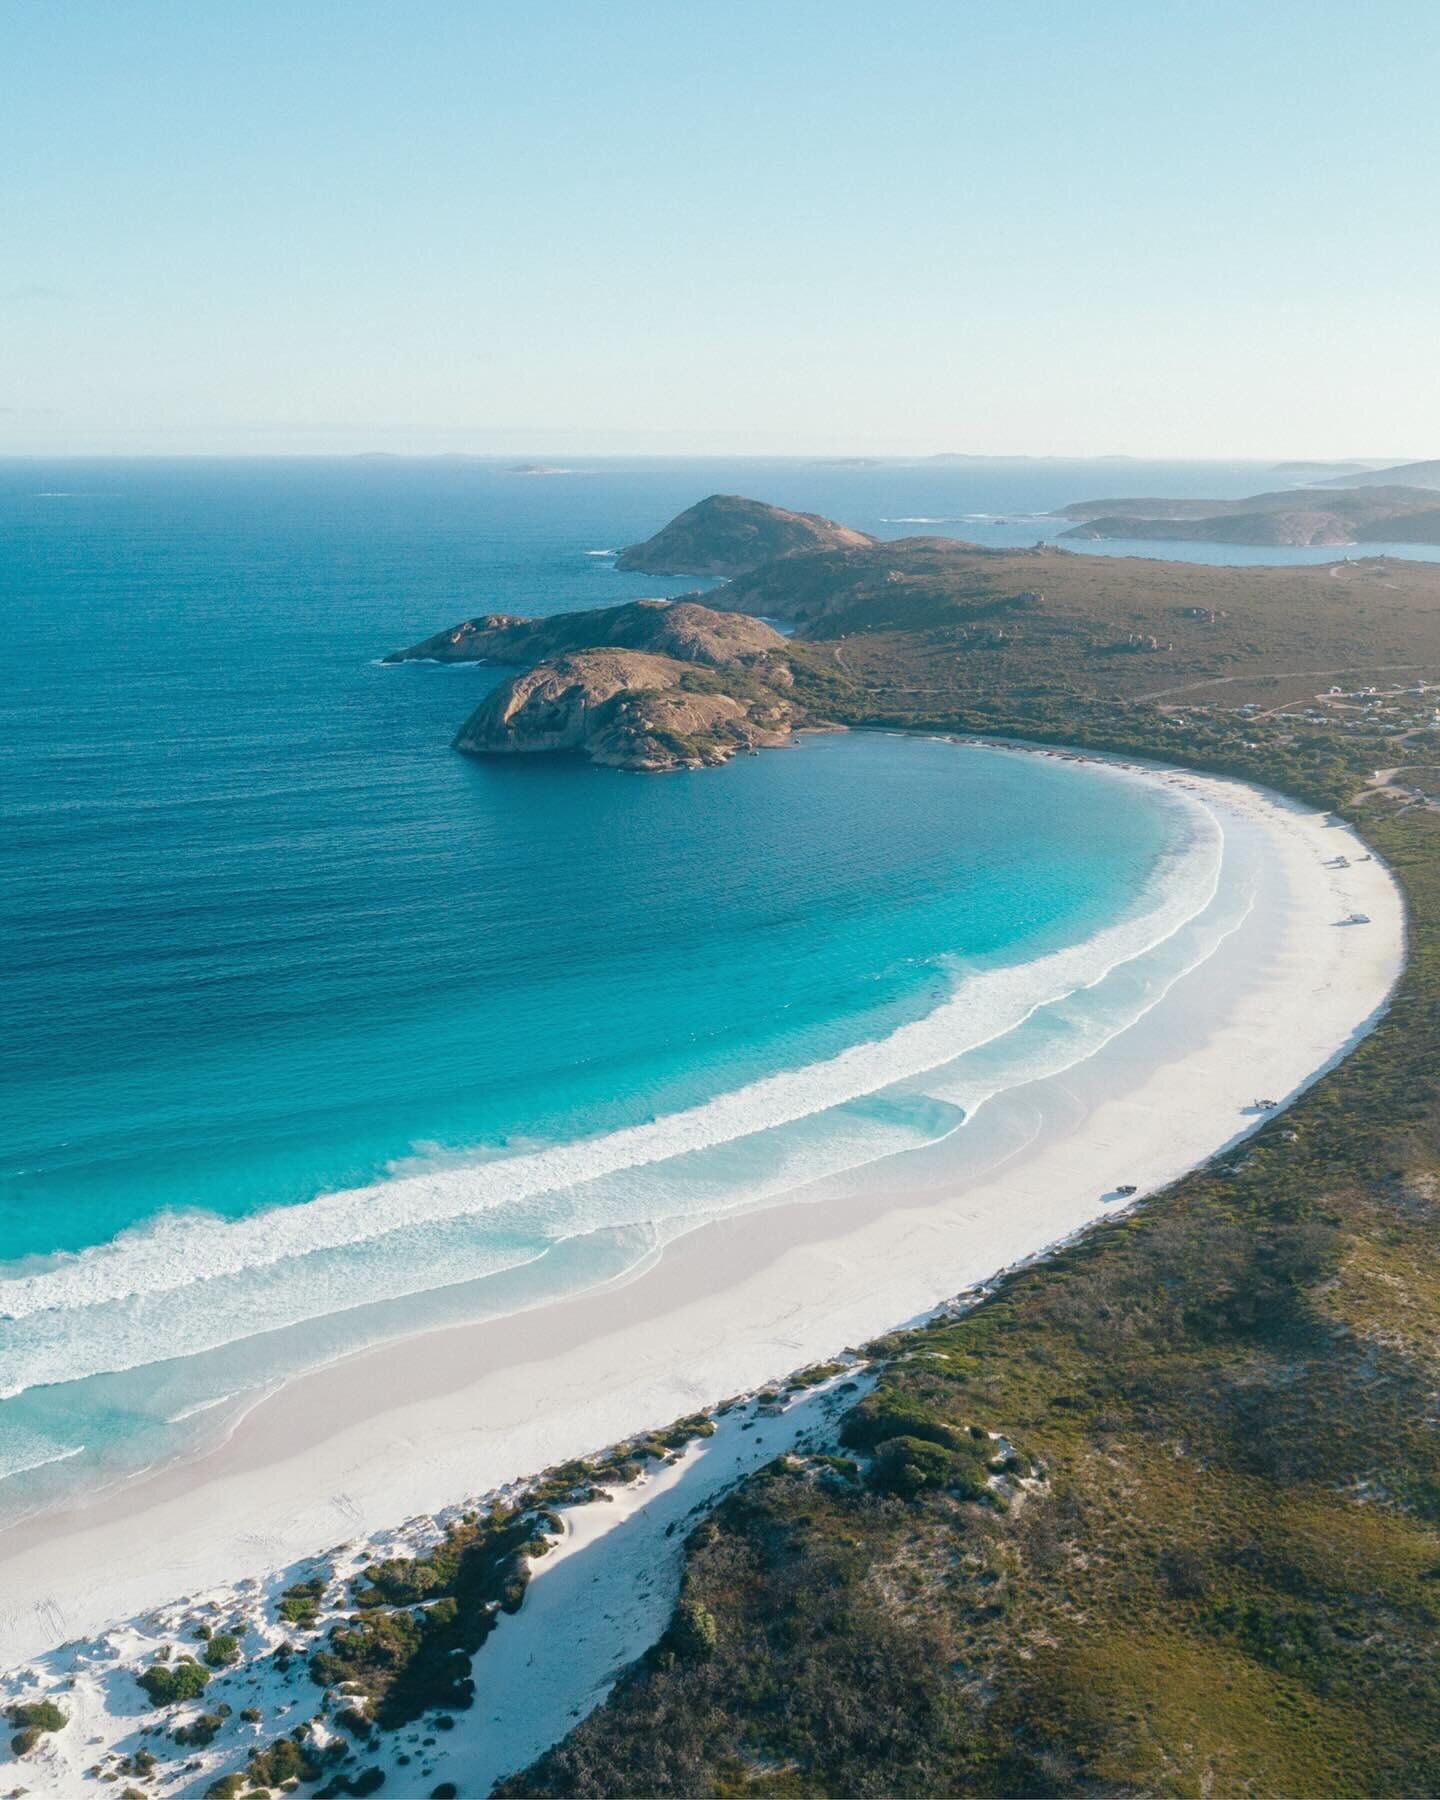 Known for seeing our furry little hoppers 🦘, Lucky Bay is certainly one of the countries best beaches for obvious reasons don&rsquo;t you think?!

.
.
.
.
.
#westernaustralia #travelcommunity #seeaustralia #vanlife #travelhappy #travelguide #travela